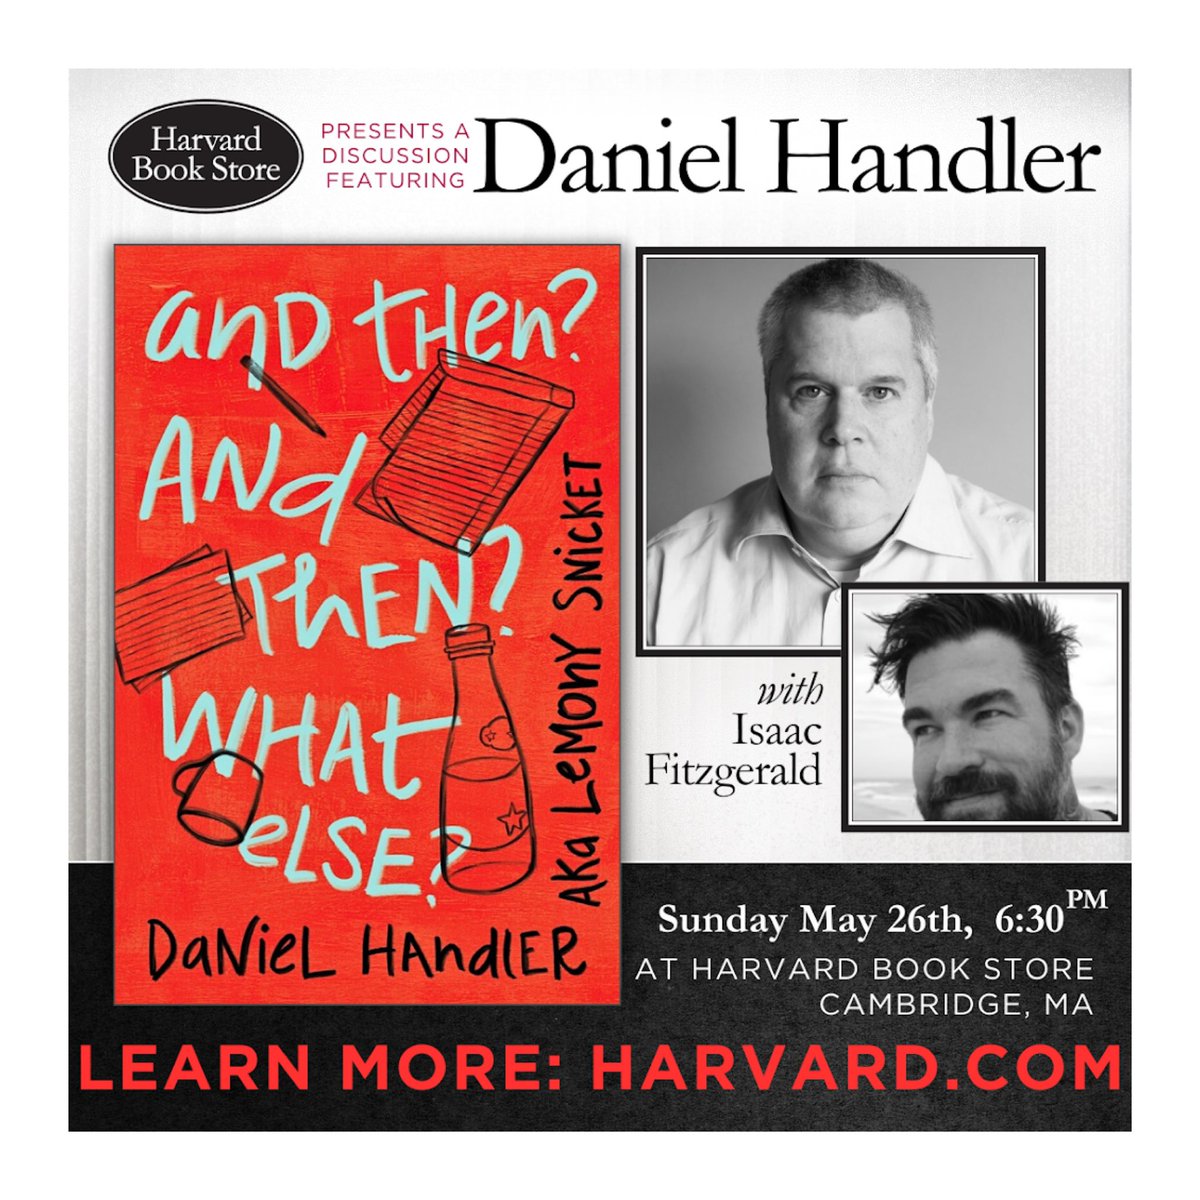 Boston! I adored @DanielHandler’s new memoir SO MUCH. Come have yourself some fun with us this Sunday evening at Harvard Bookstore.